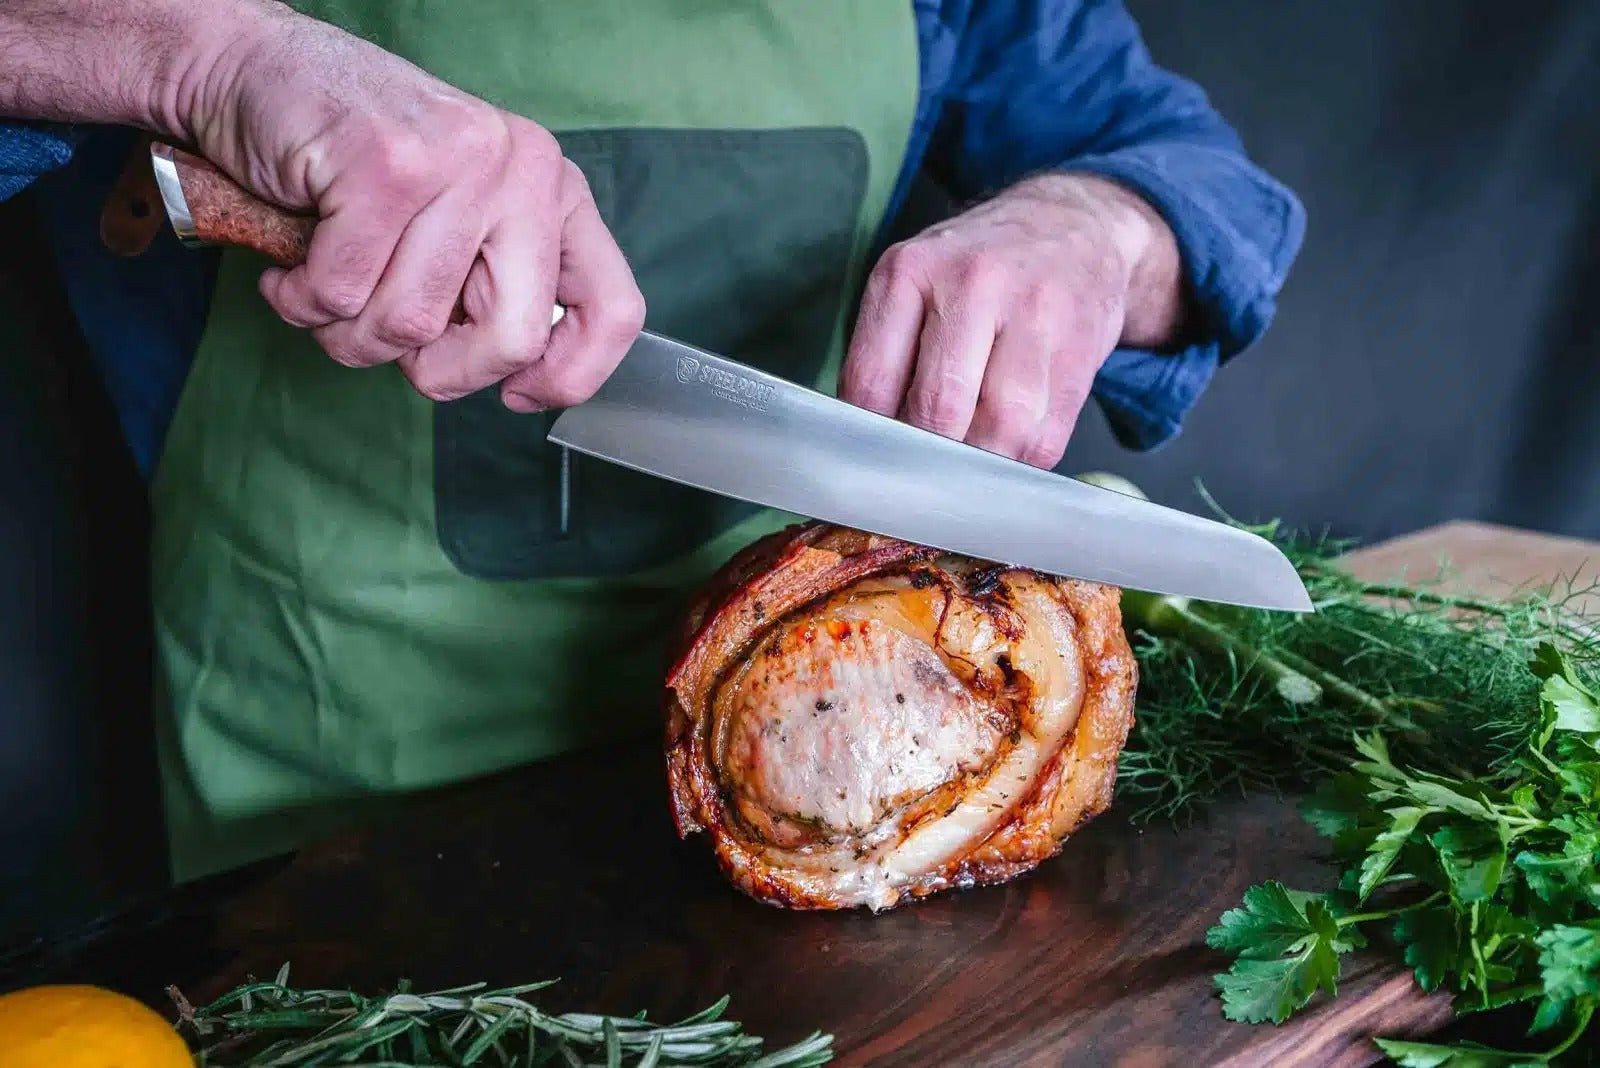 The Best Carbon Steel Knives for Chefs Who Want Super-Sharp Cuts